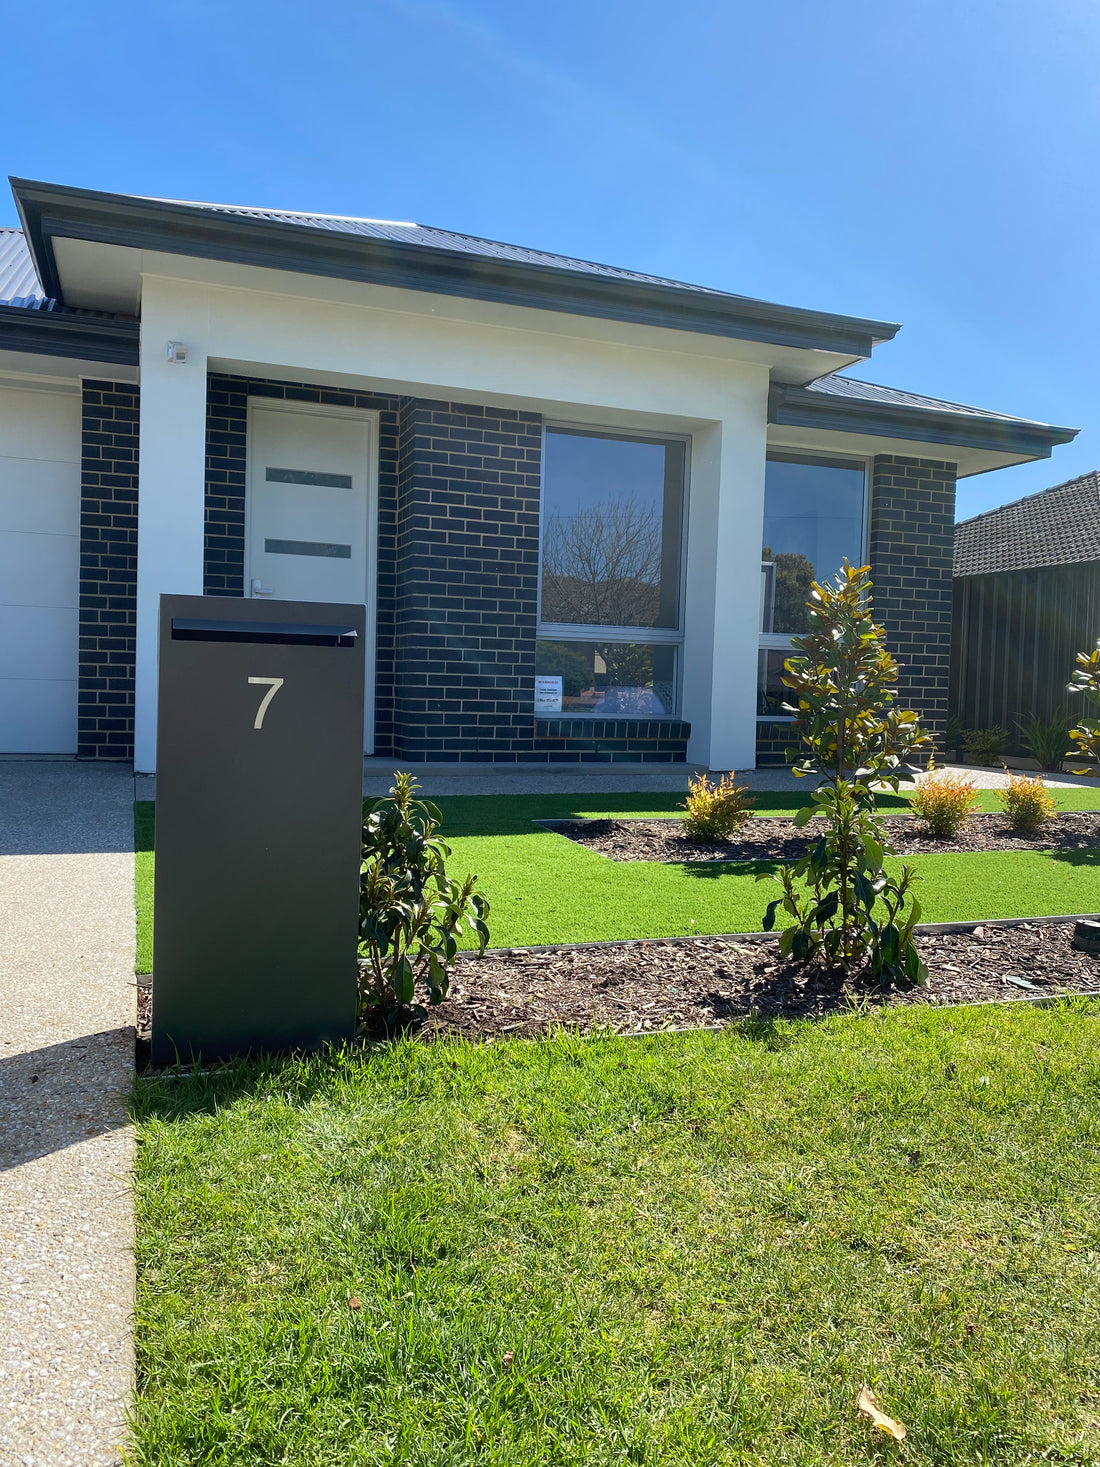 How to Choose the Right Letterbox For Your Home - Adelaide Letterboxes